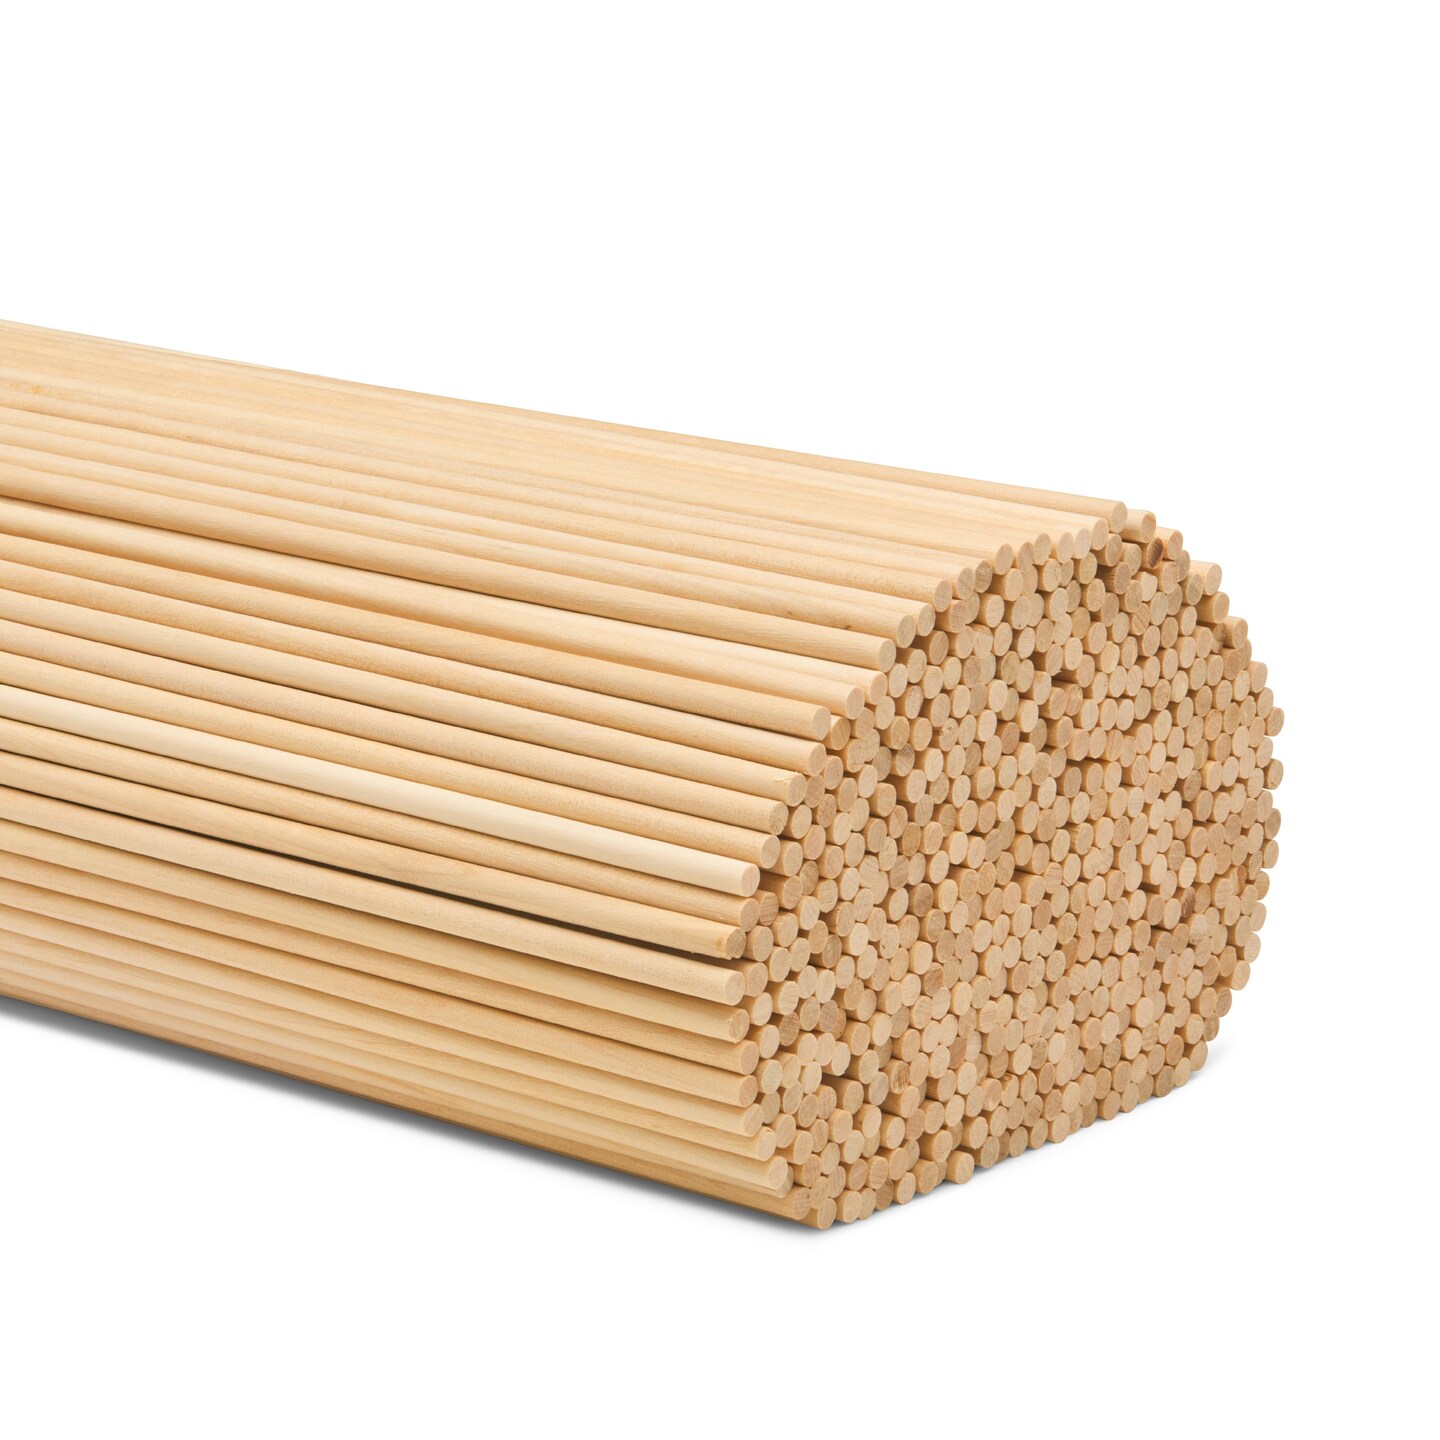 Wooden Dowel Rods 3/16 inch Thick, Multiple Lengths Available